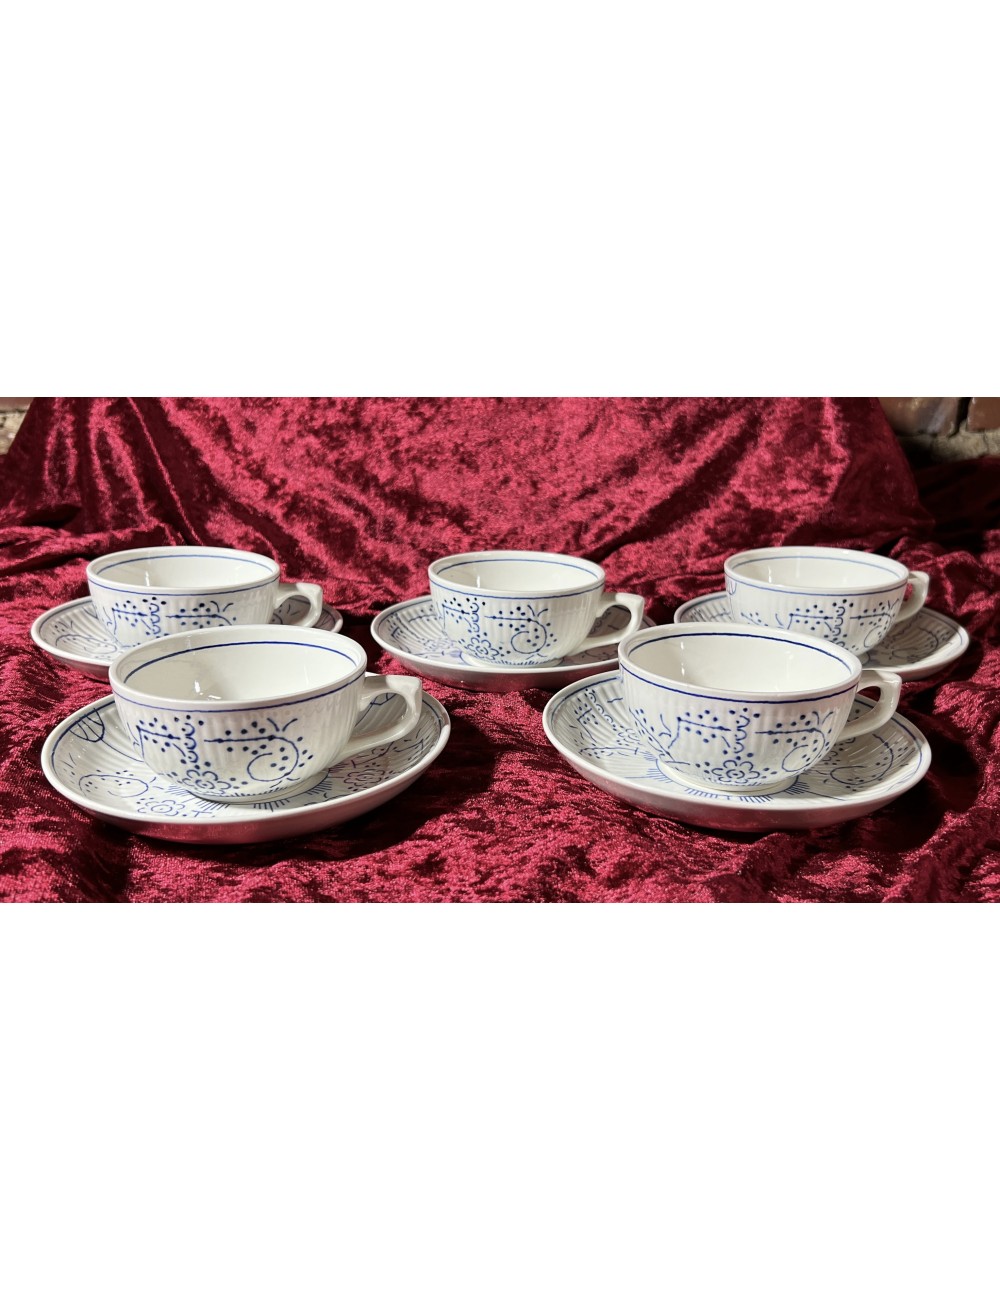 Cup and saucer - Boch Keramis with blue stamp - décor COPENHAGUE in blue